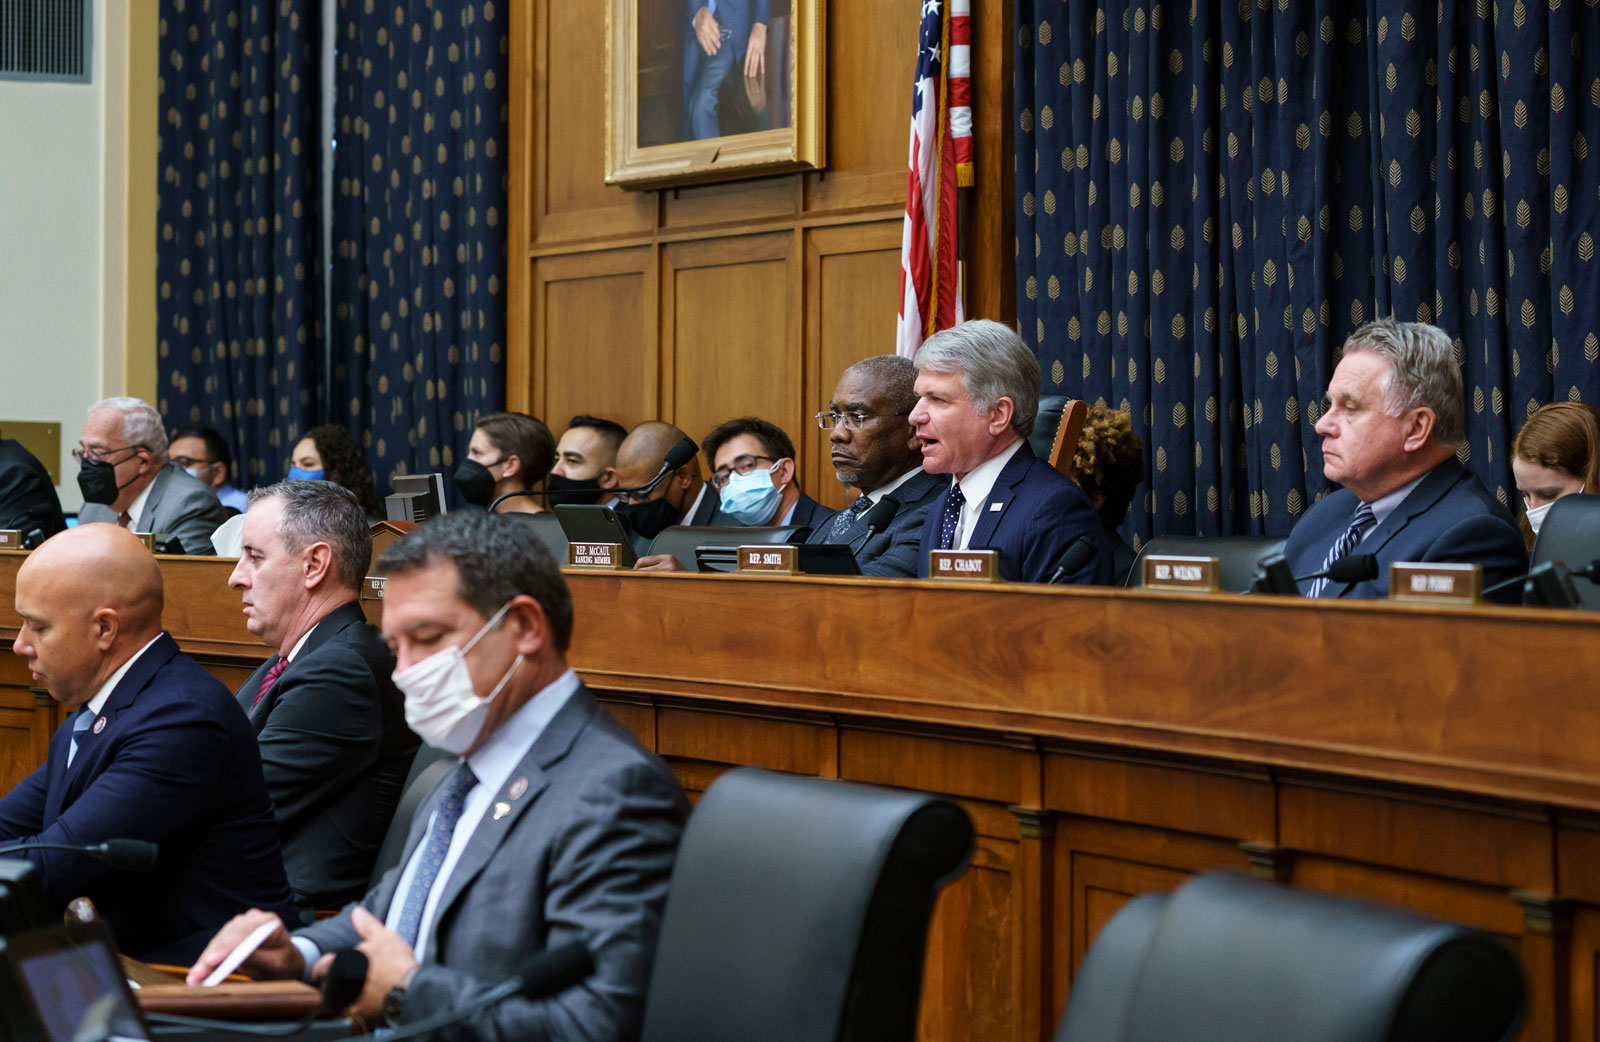 Rep. Michael McCaul, a member of the House Foreign Affairs Committee, joined at left by Chairman Gregory Meeks, discuss the U.S. withdrawal from Afghanistan with Secretary of State Antony Blinken who appeared remotely.